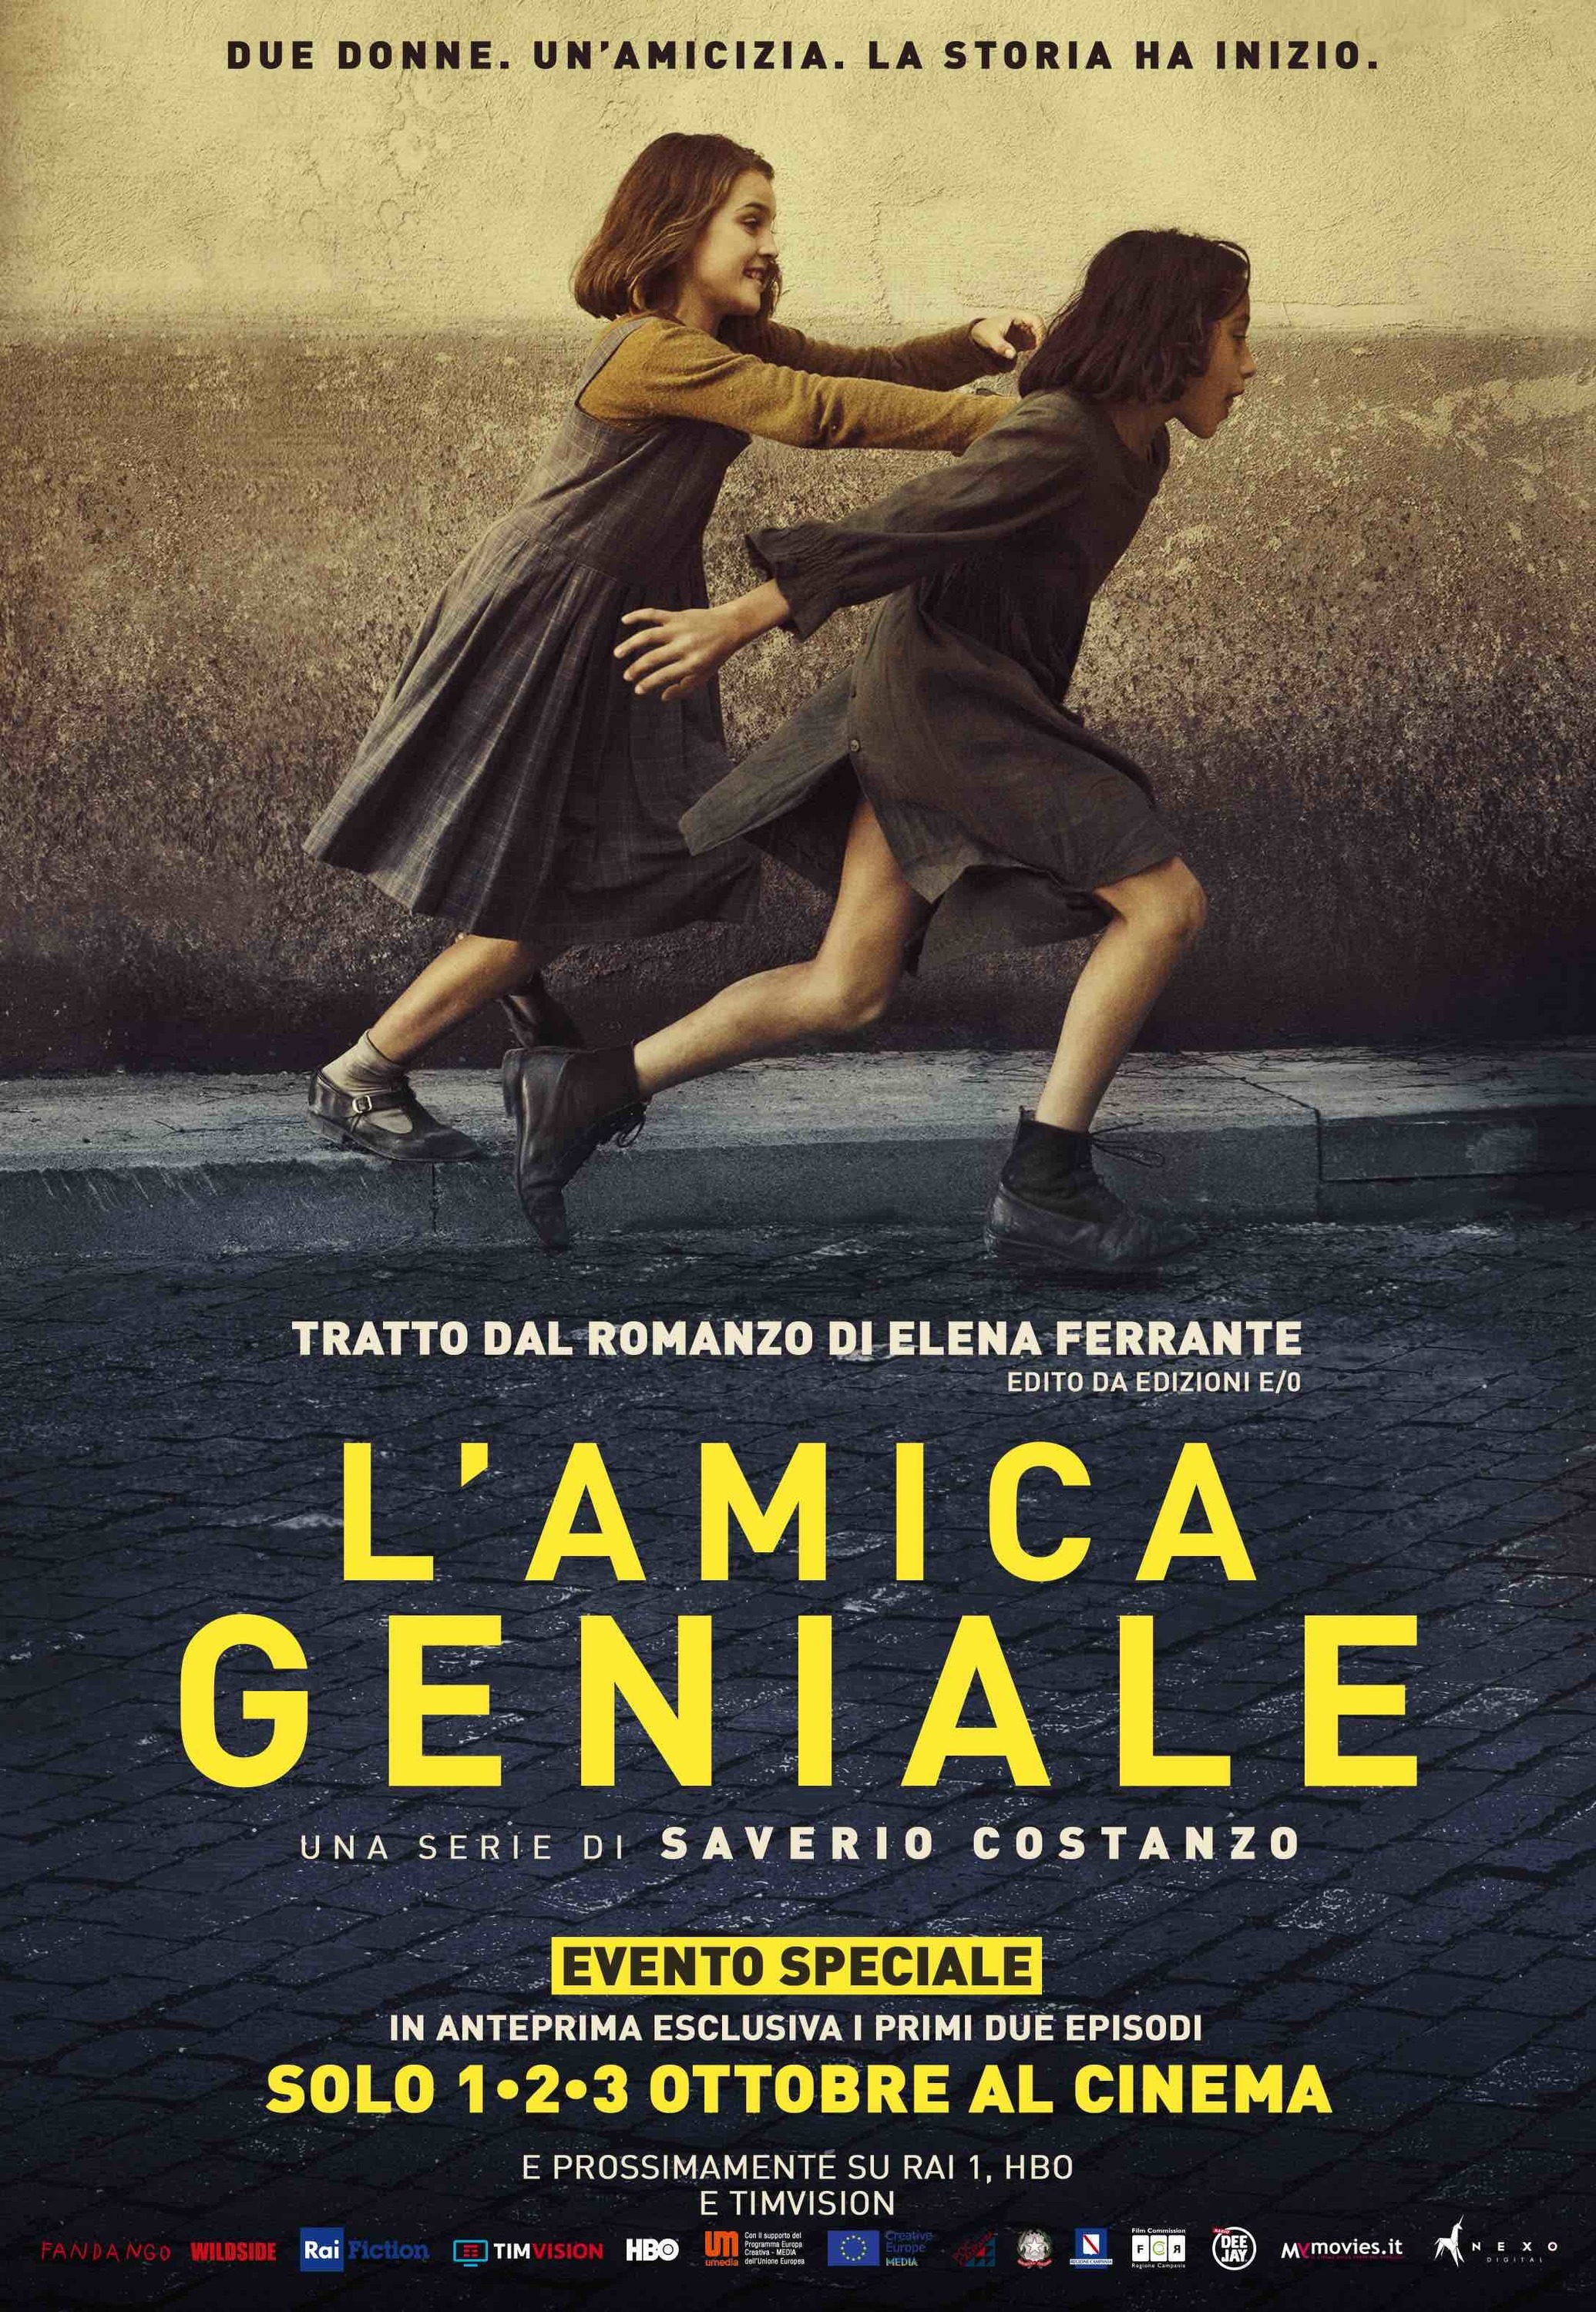 Mega Sized TV Poster Image for L'amica geniale (#1 of 10)